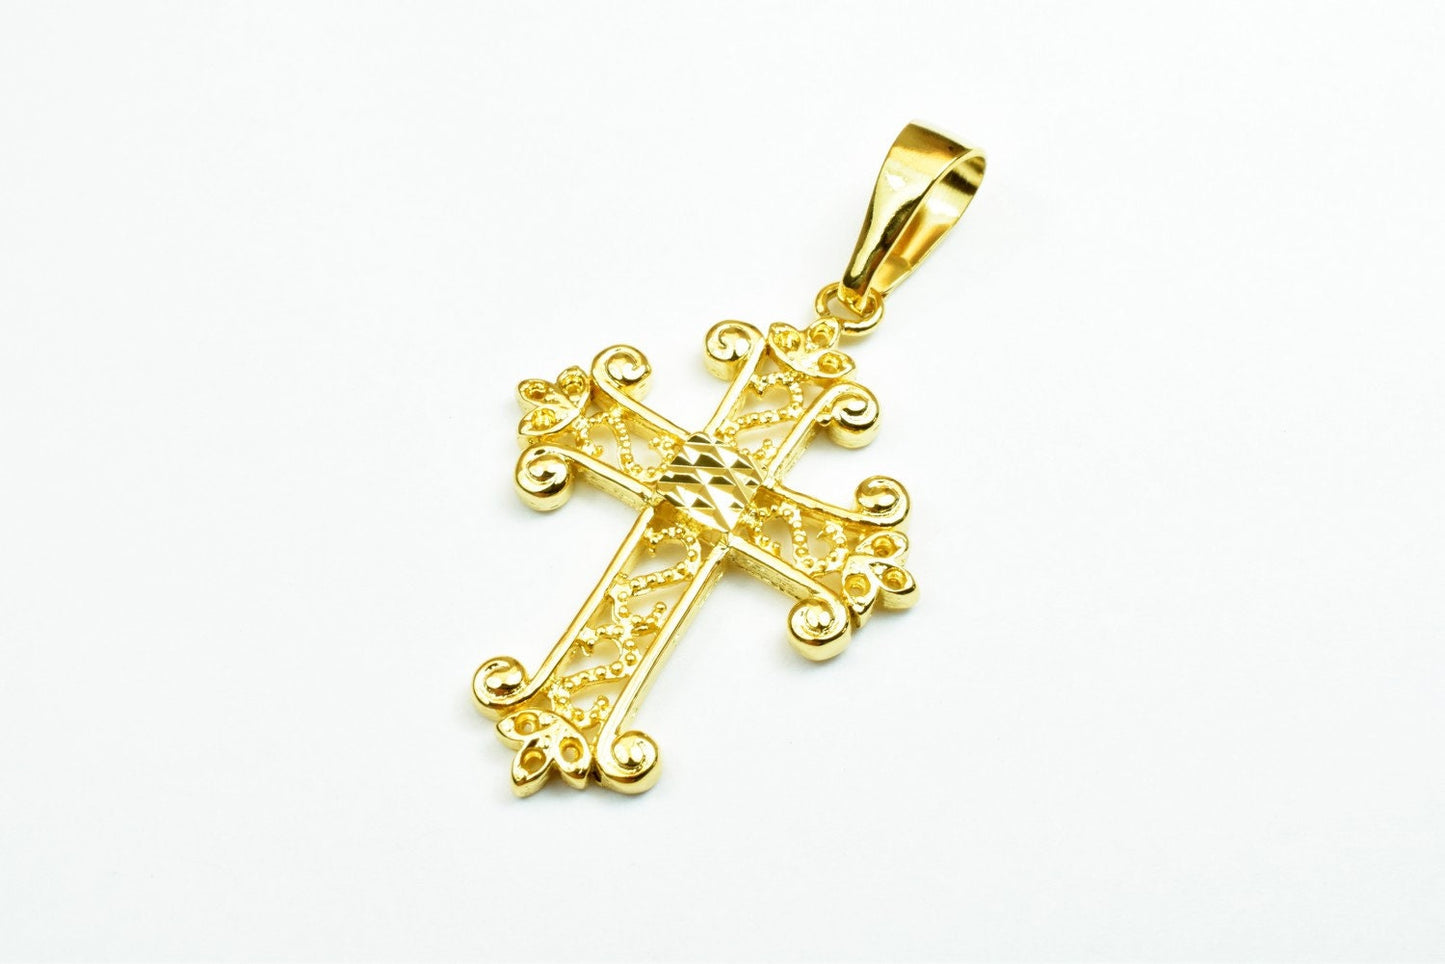 18K as Gold Filled* Filigree Cross Pendants Size 40x28mm, Christian Religious Cross Charm, First Communion Baby Baptism For Jewelry Making